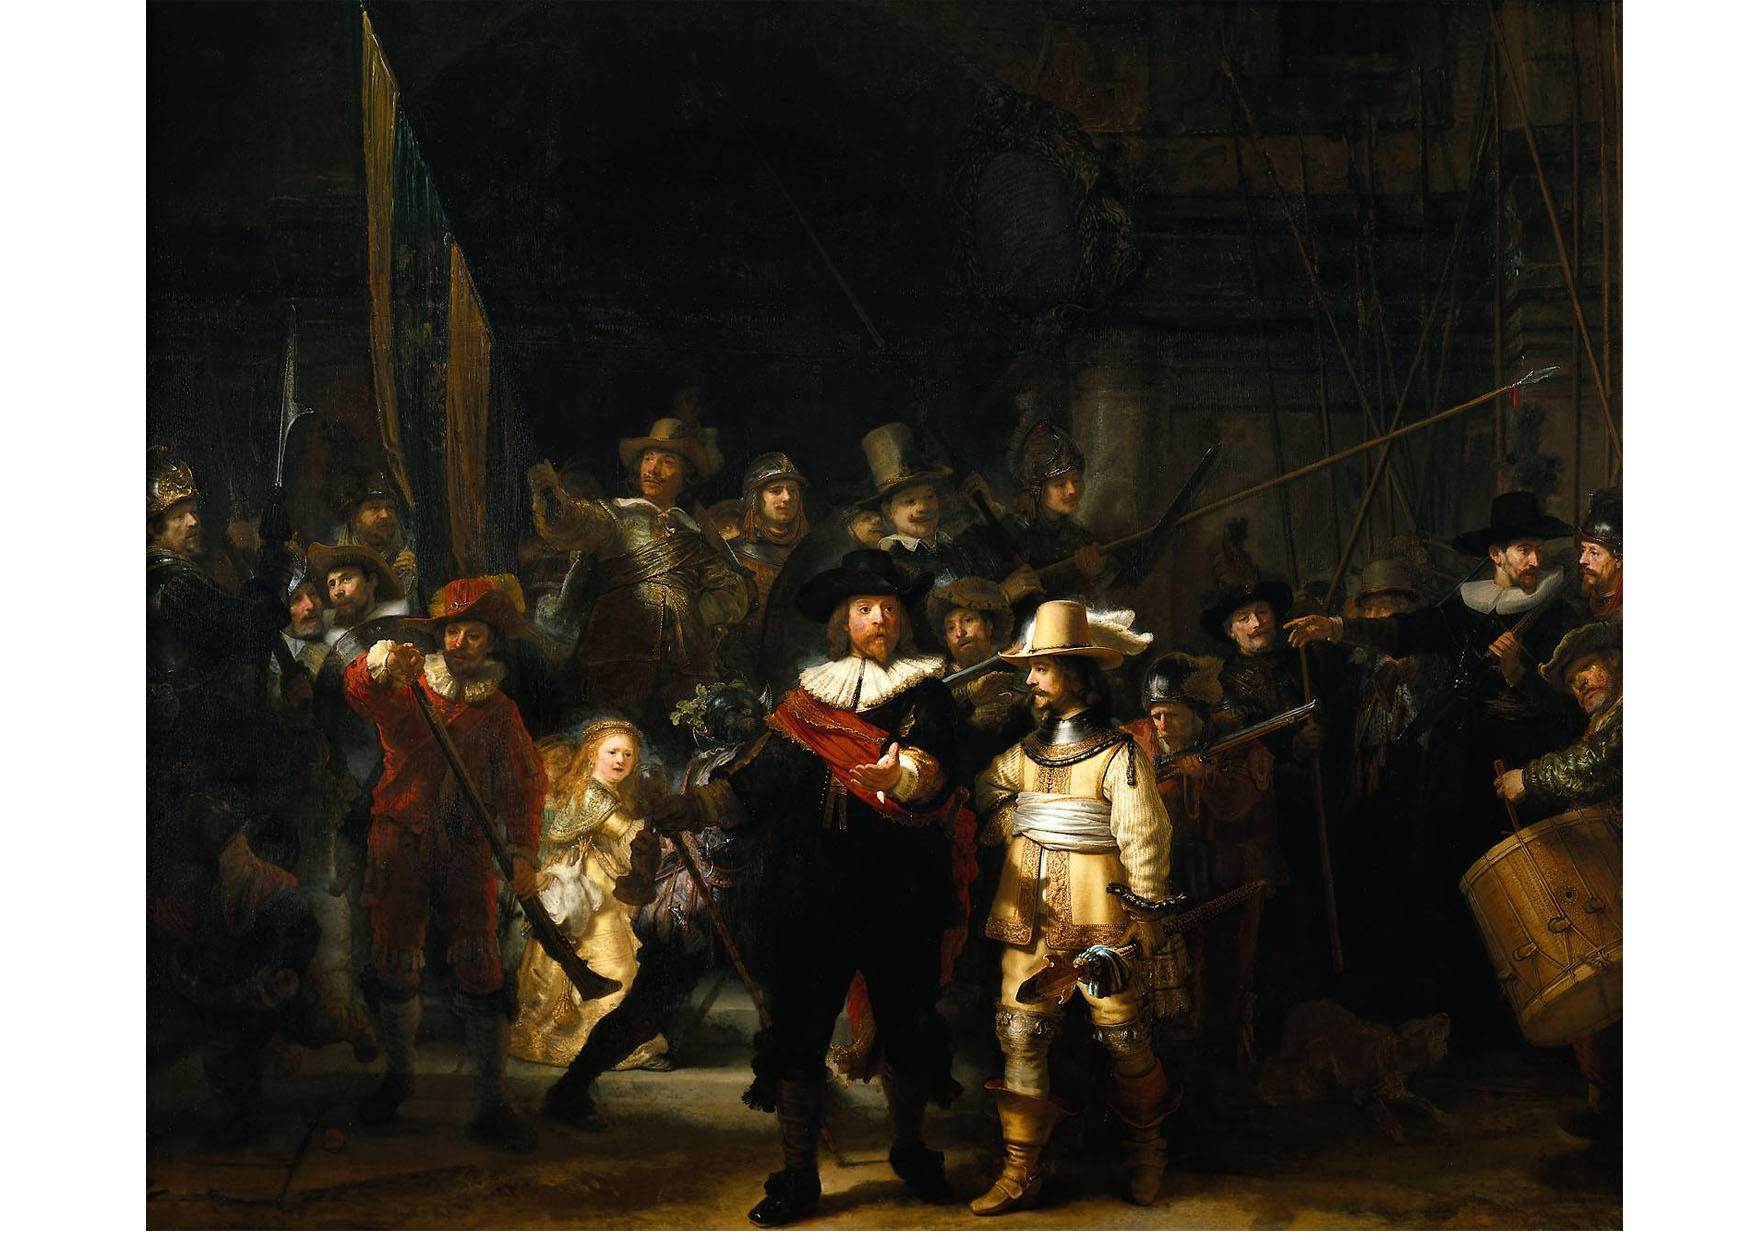 Image The Night Watch - Rembrandt